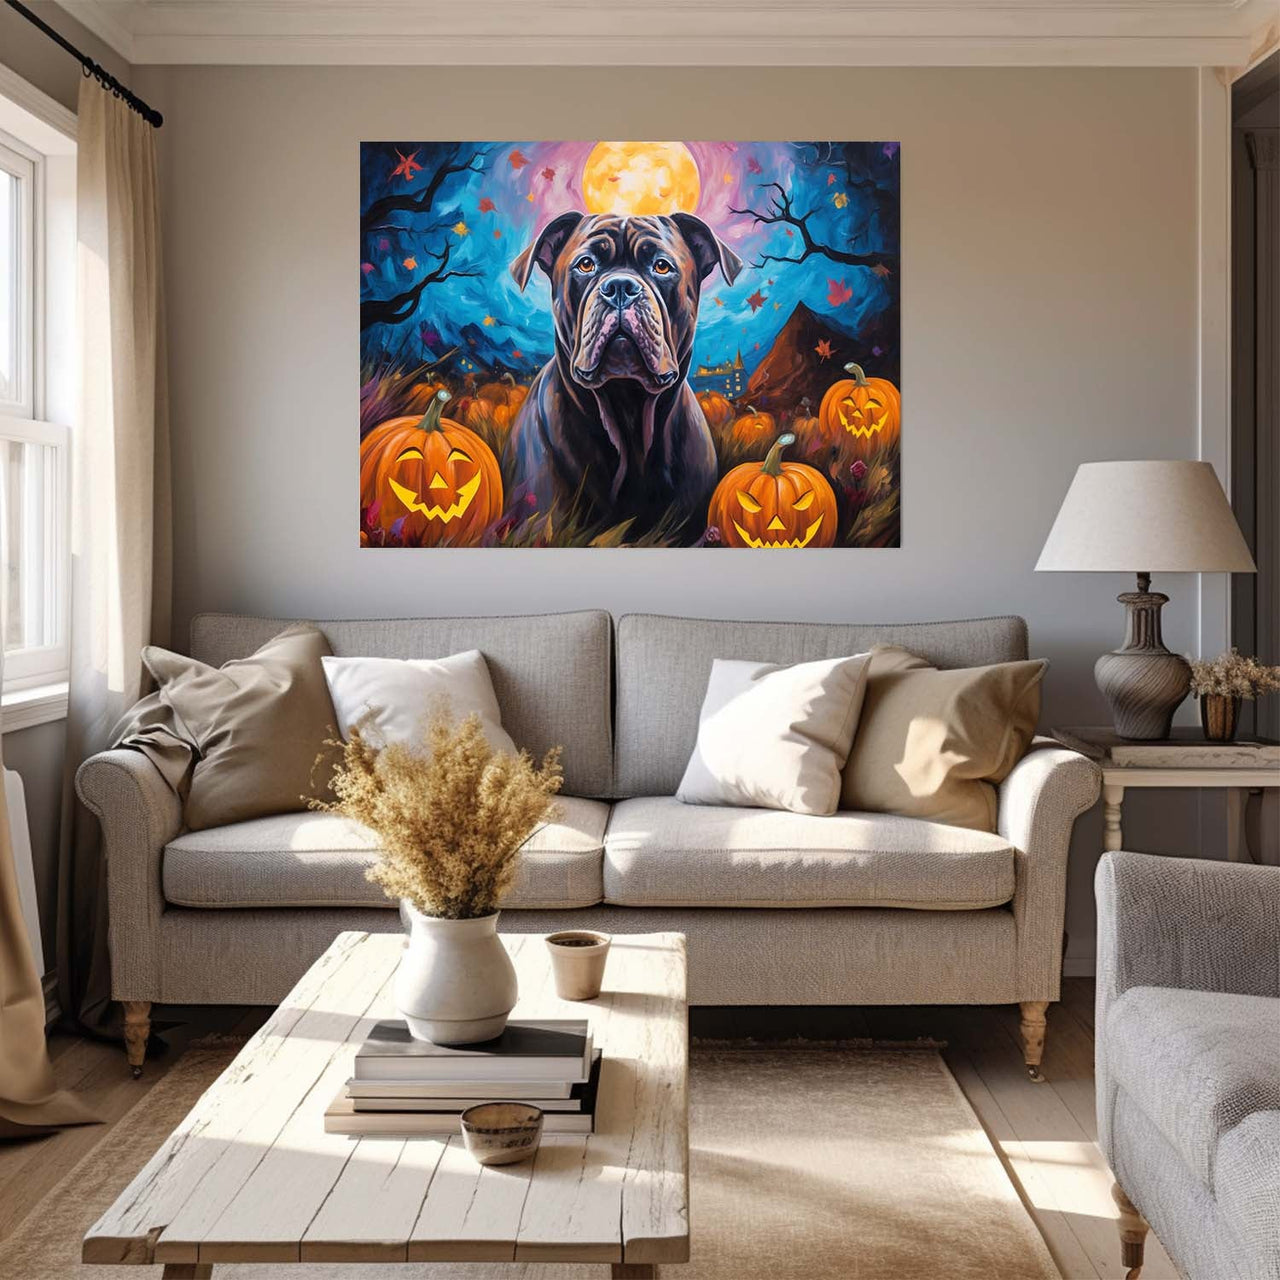 Cane Corso Dog 02 Halloween With Pumpkin Oil Painting Van Goh Style, Wooden Canvas Prints Wall Art Painting , Canvas 3d Art